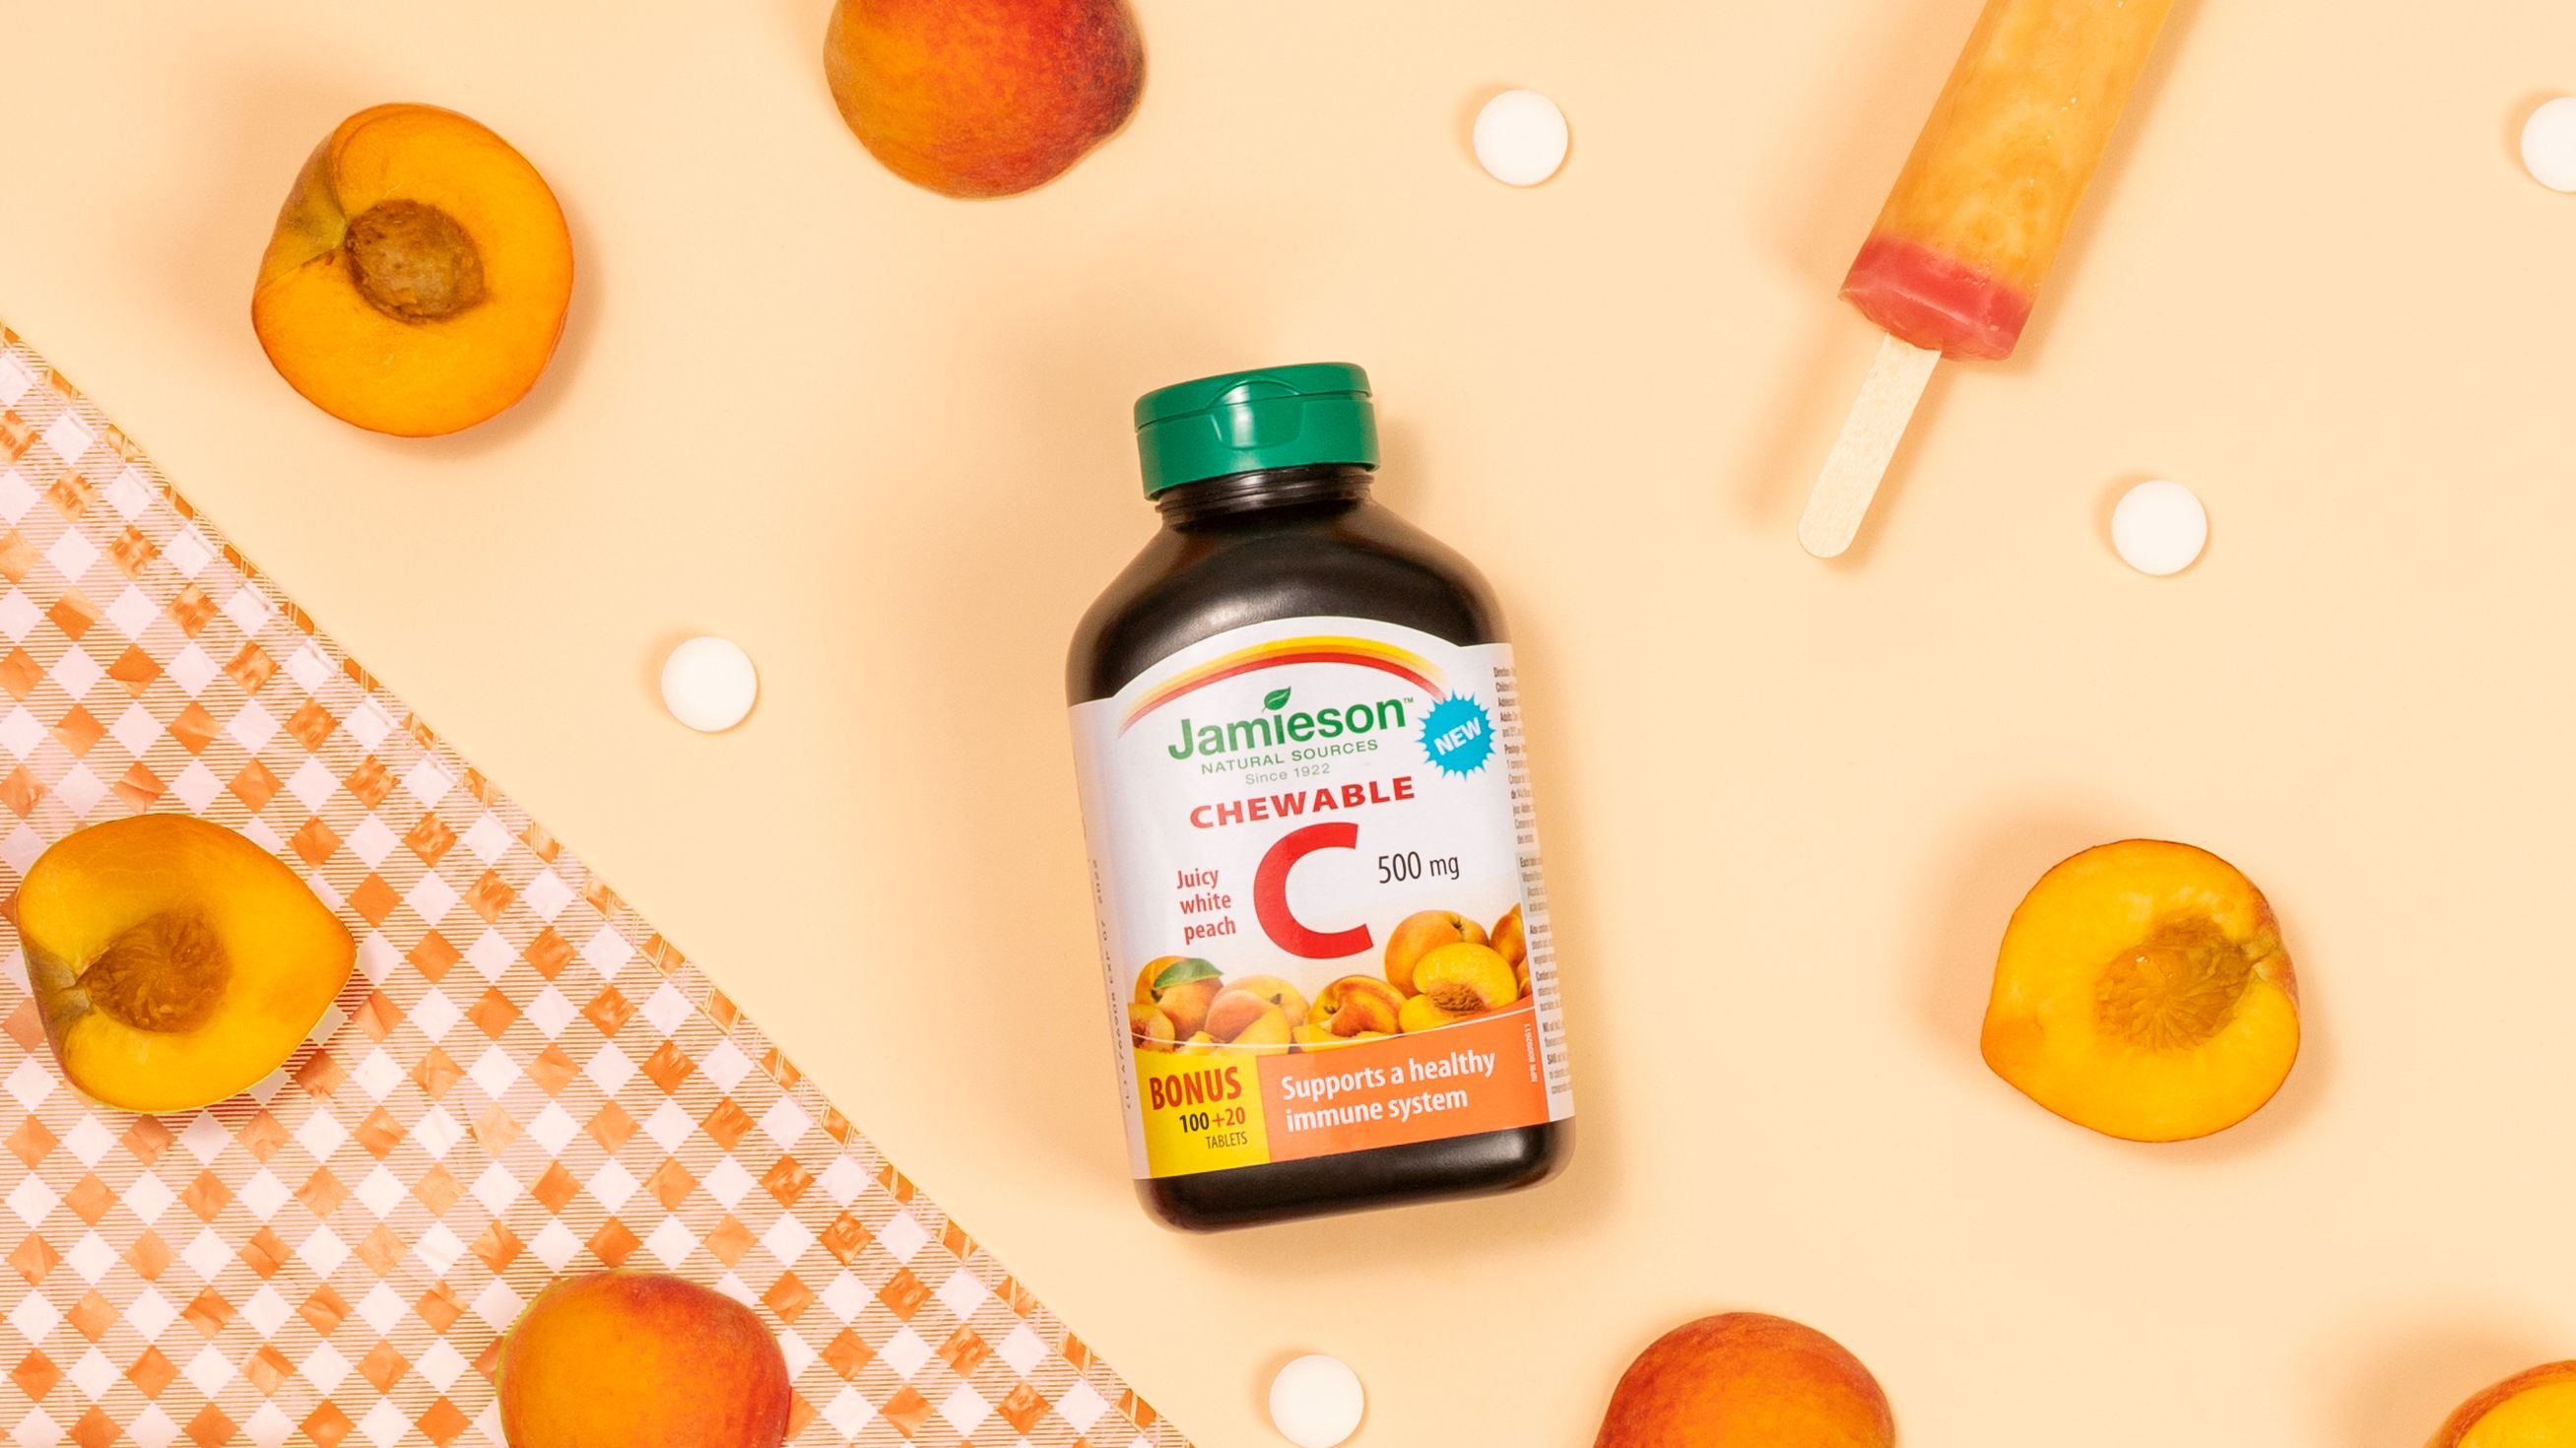 Jamieson Vitamins on X: "Vitamin C helps support a healthy immune system  and is an antioxidant source, important for maintaining good health. Jamieson  Vitamin C Chewable tablets offer all the benefits of